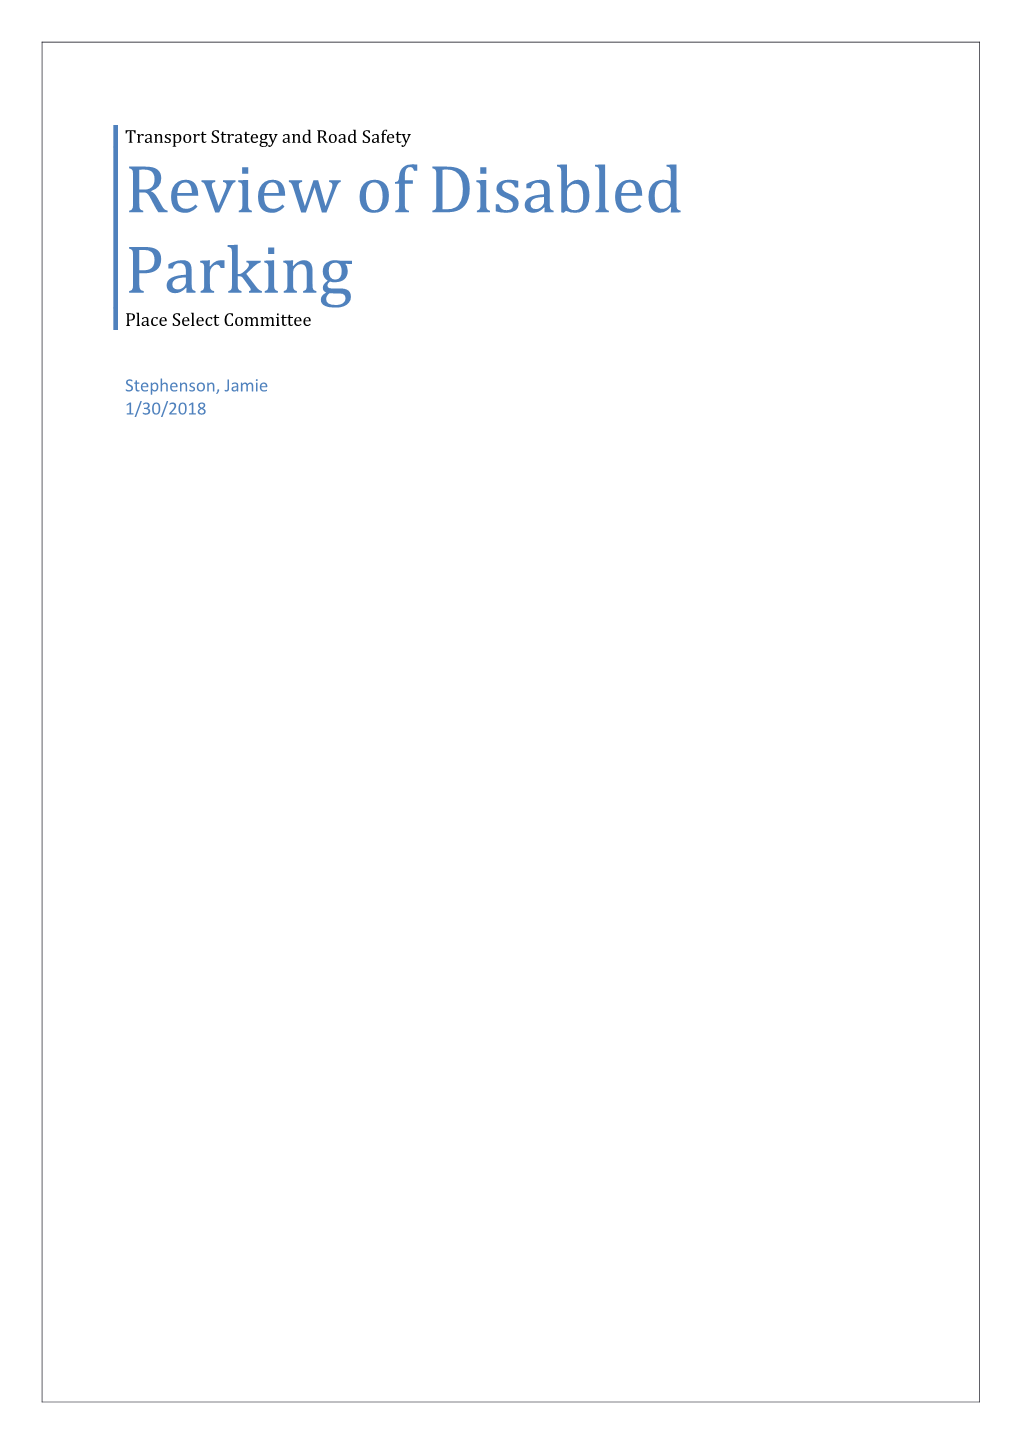 Review of Disabled Parking